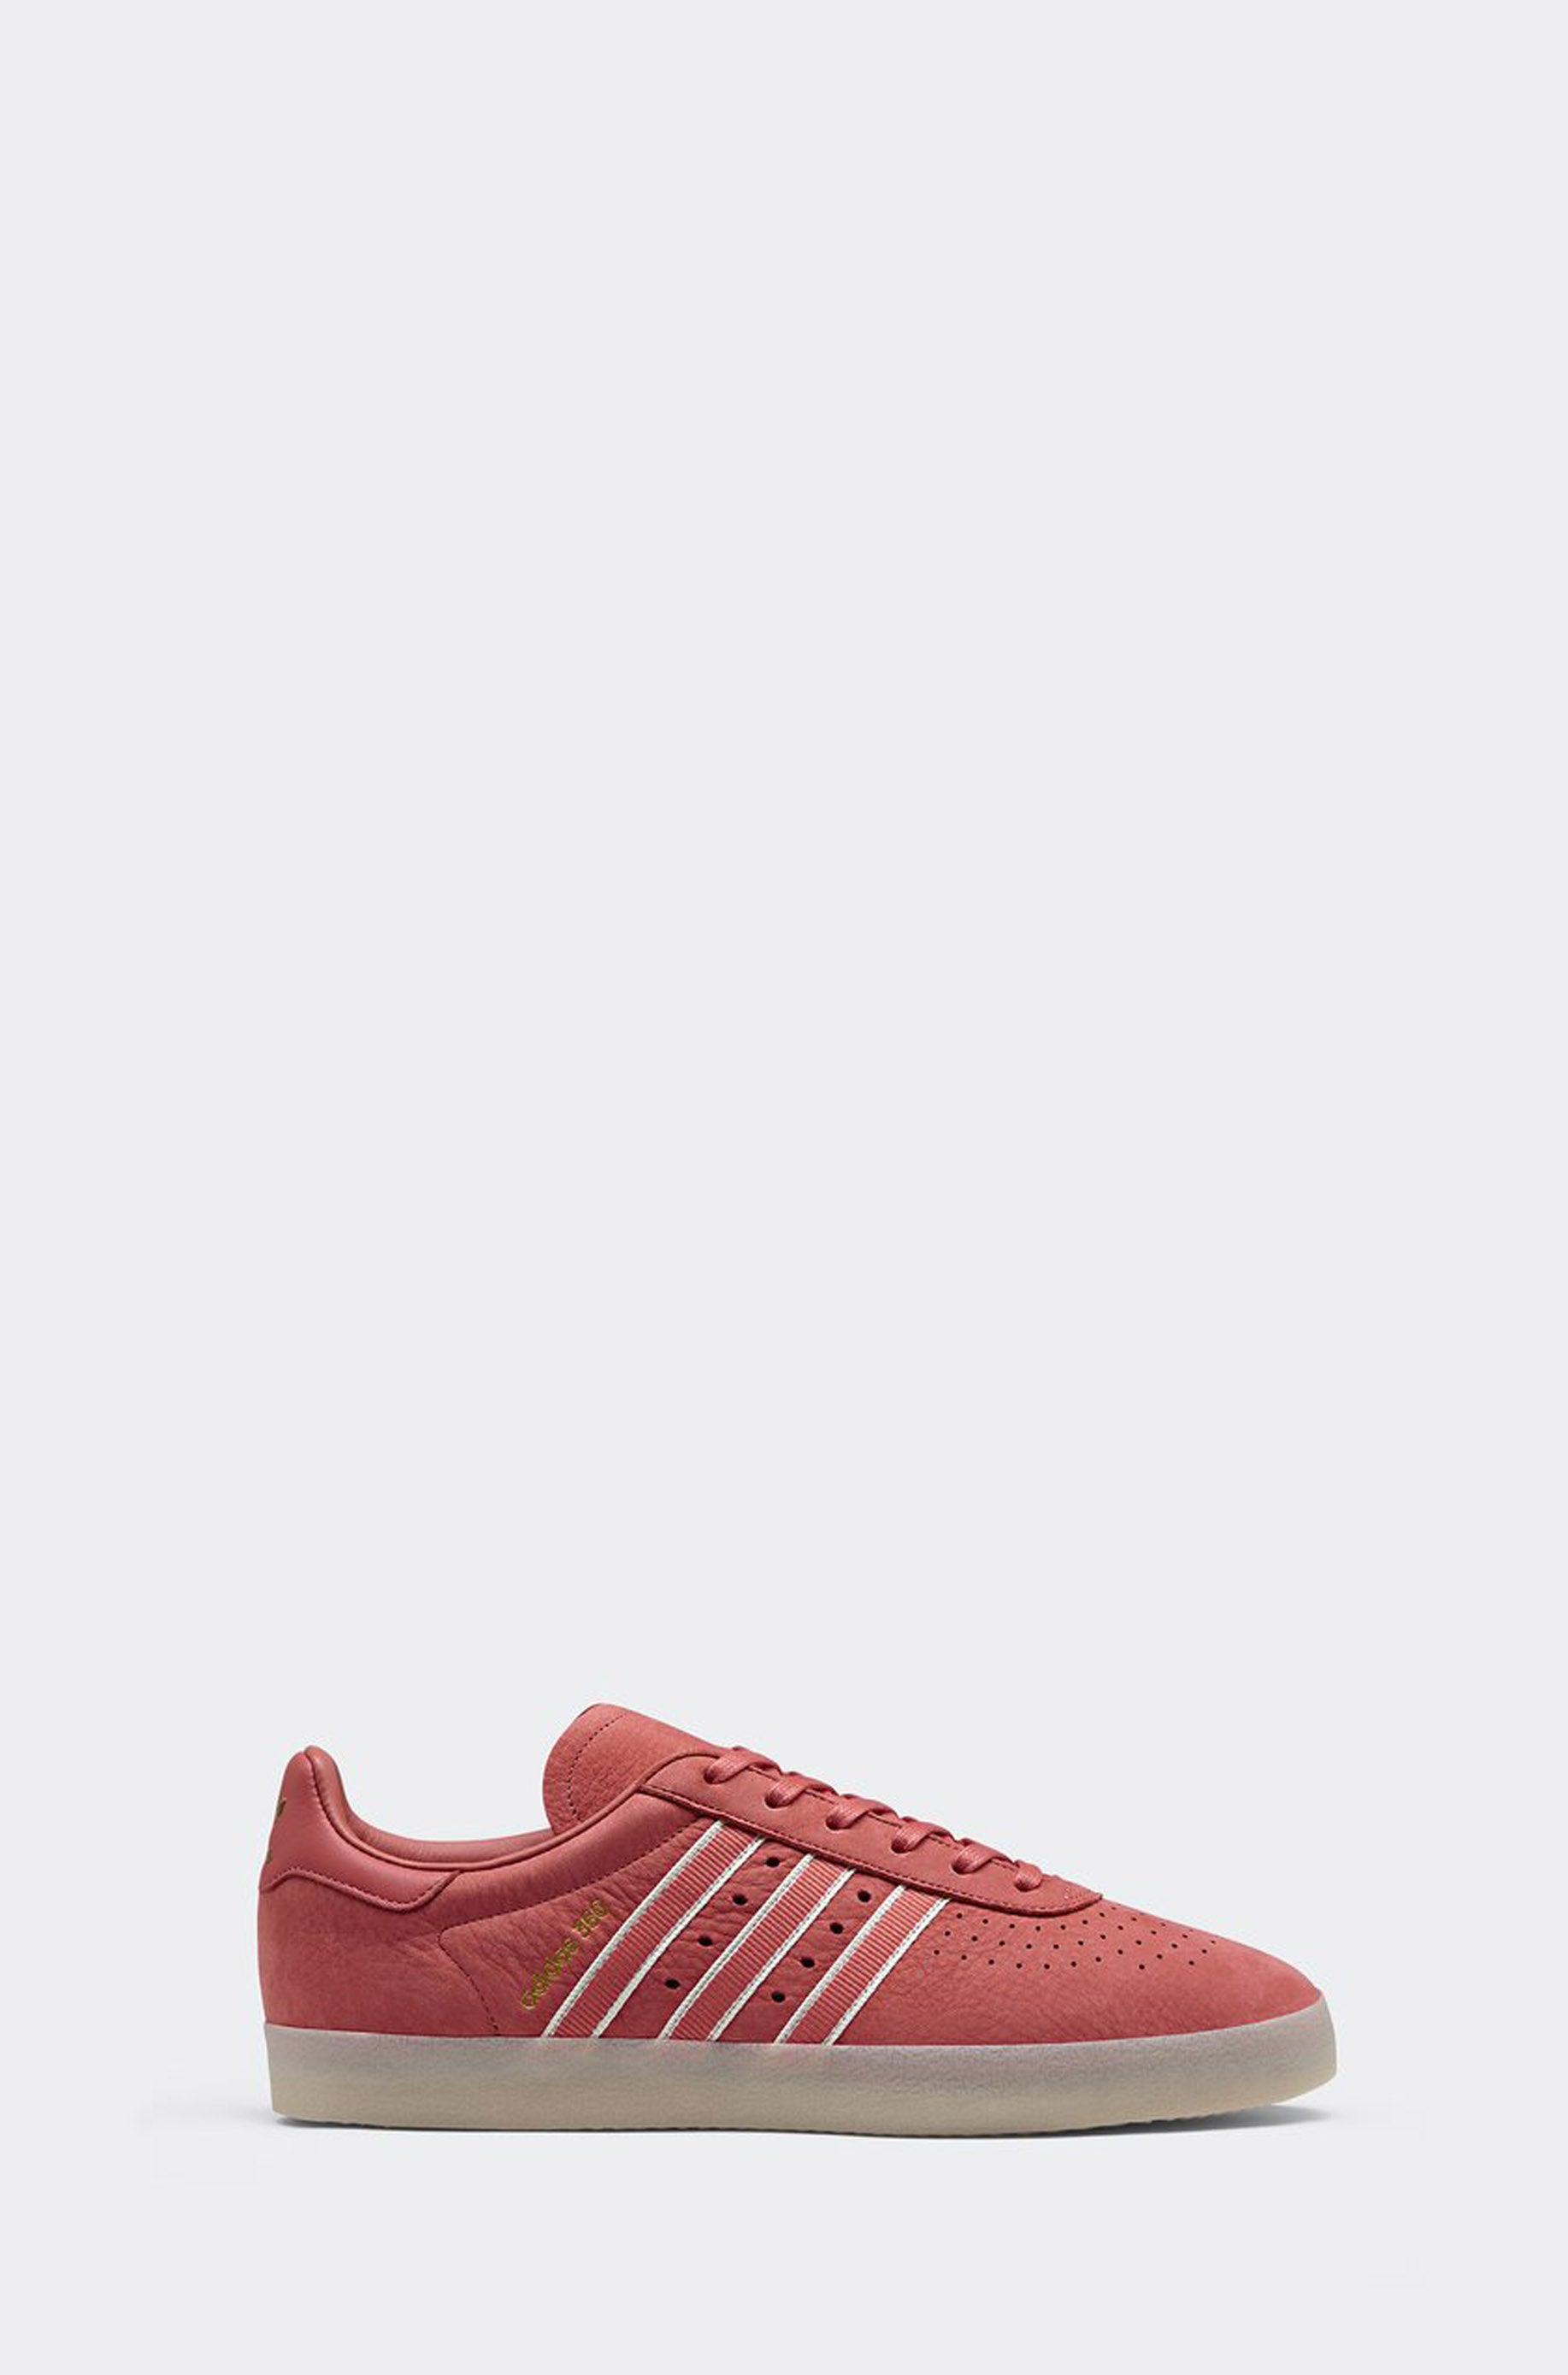 adidas 350 x oyster holdings